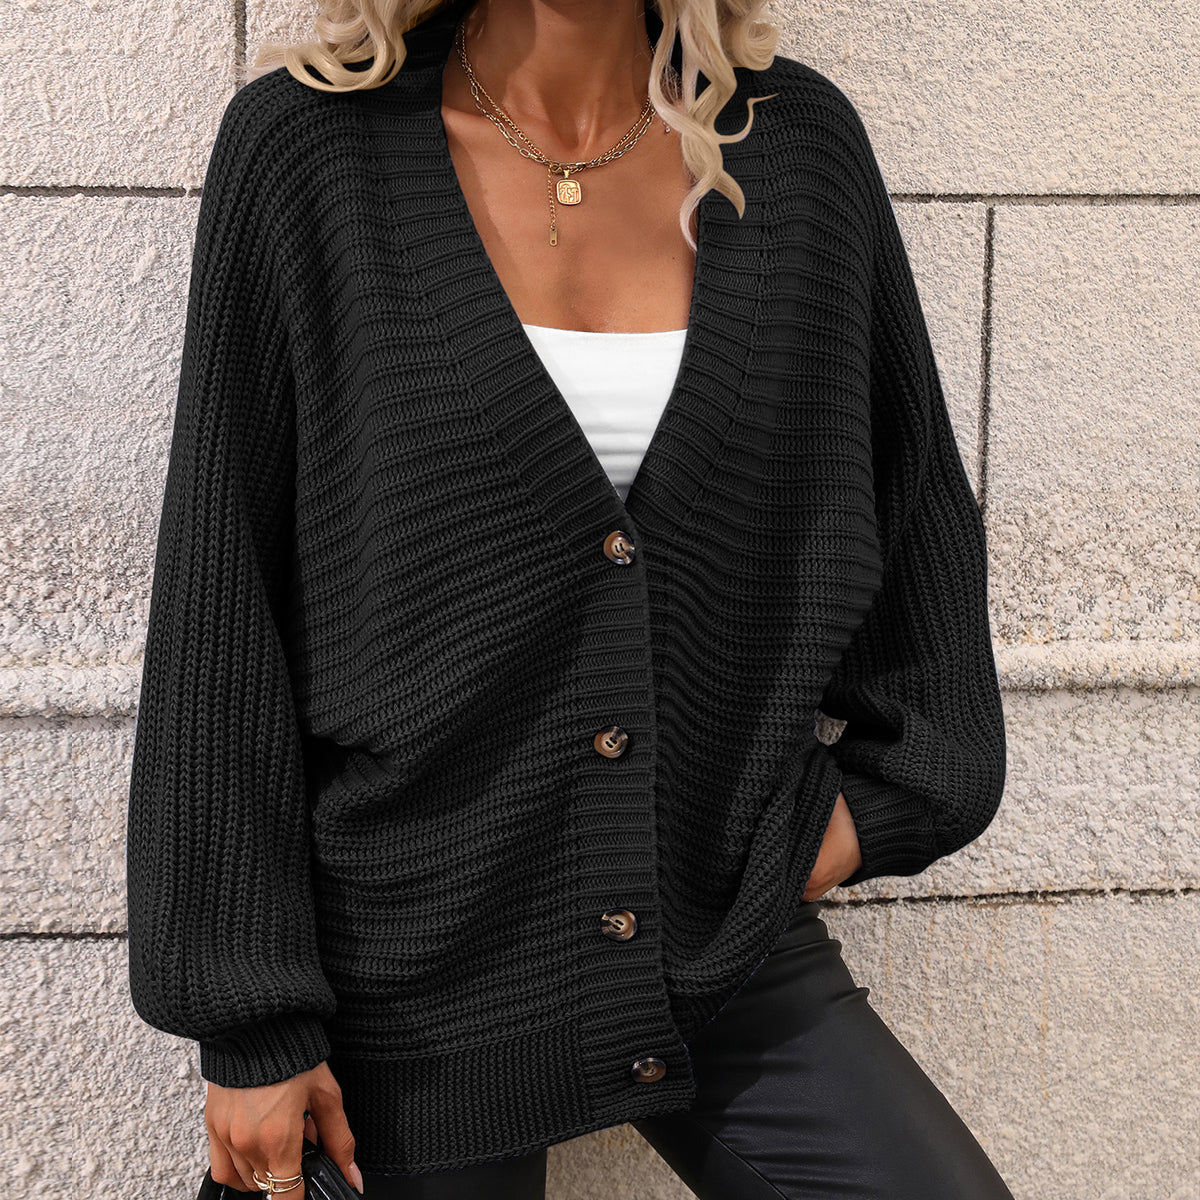 Women's Solid Color Knitted Cardigan Loose Sweater